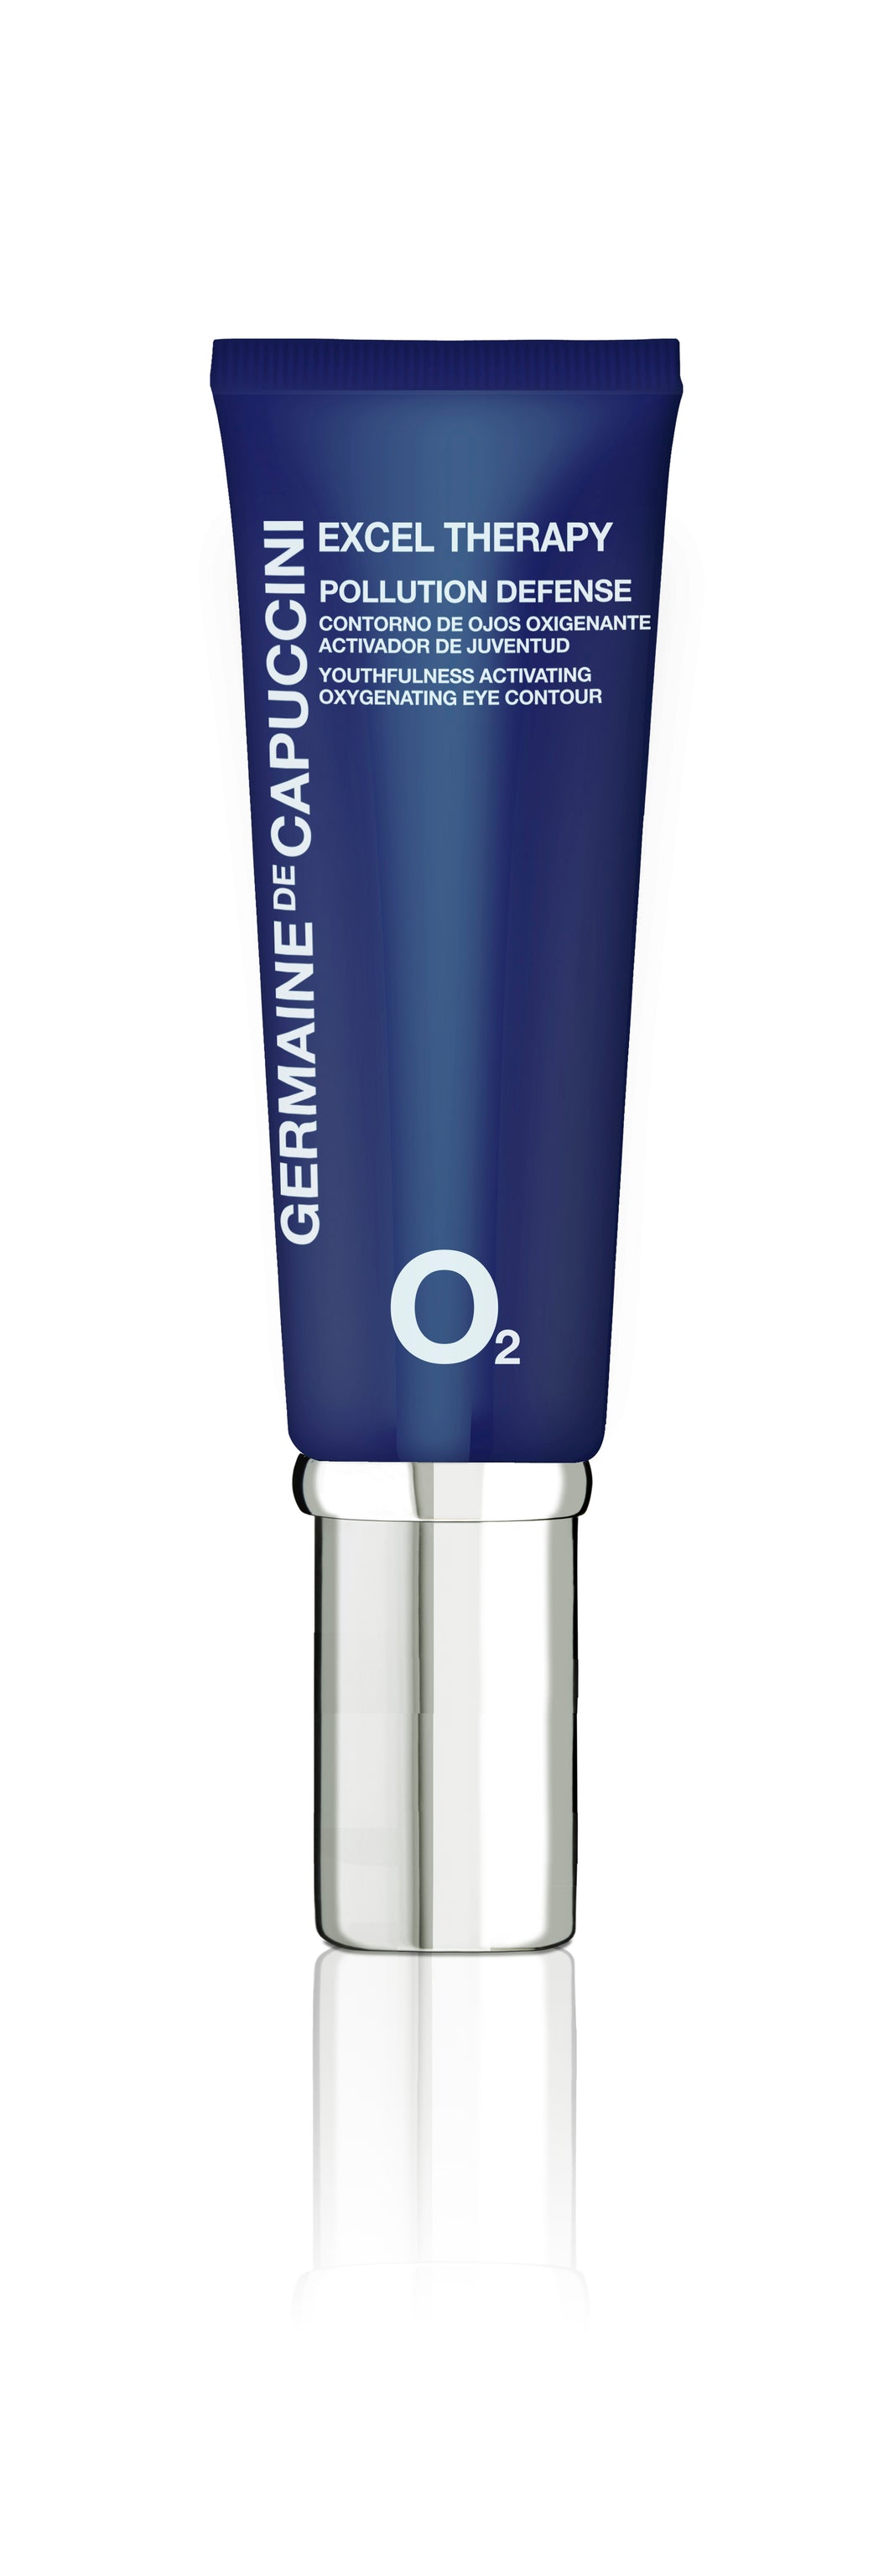 Excel Therapy O2 - Youthfulness Activating Oxygenating Oogcrème